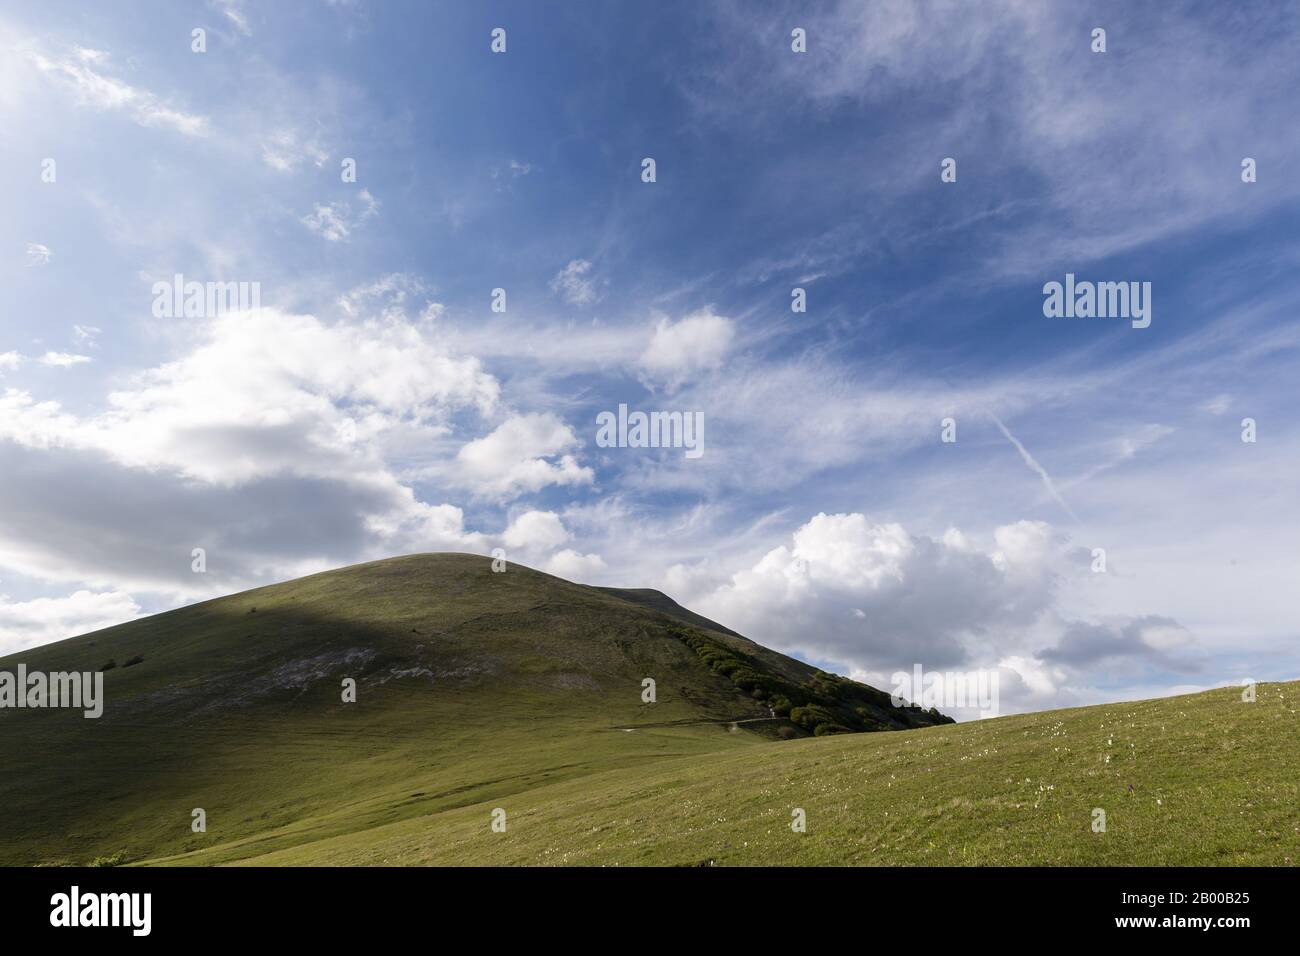 Mountains view in spring with green meadows and blue sky Stock Photo